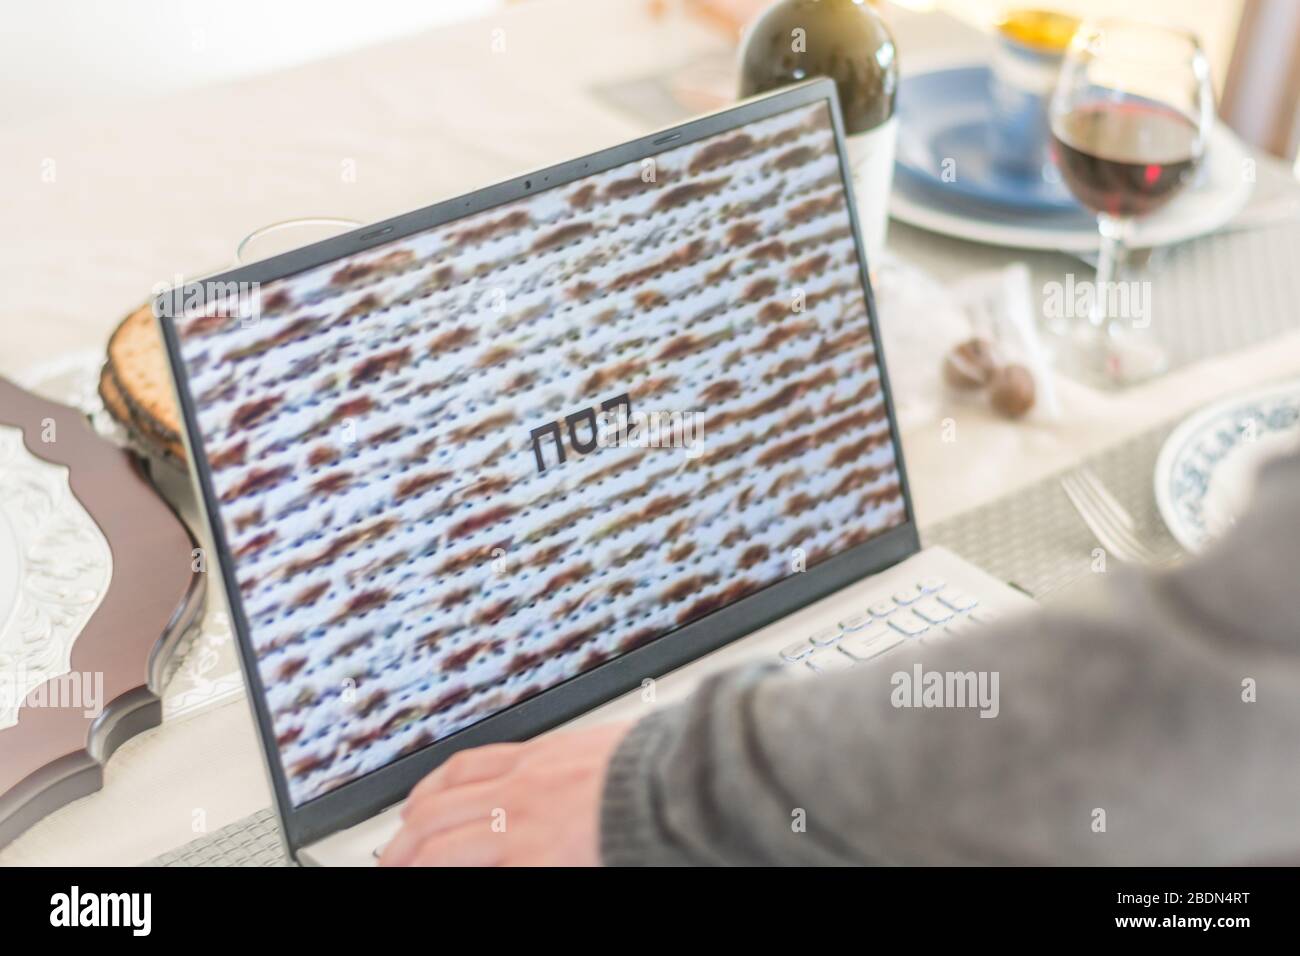 Isolated presentation on a laptop during the Passover Seder dinner mixing new traditions with old traditions- Israel Stock Photo